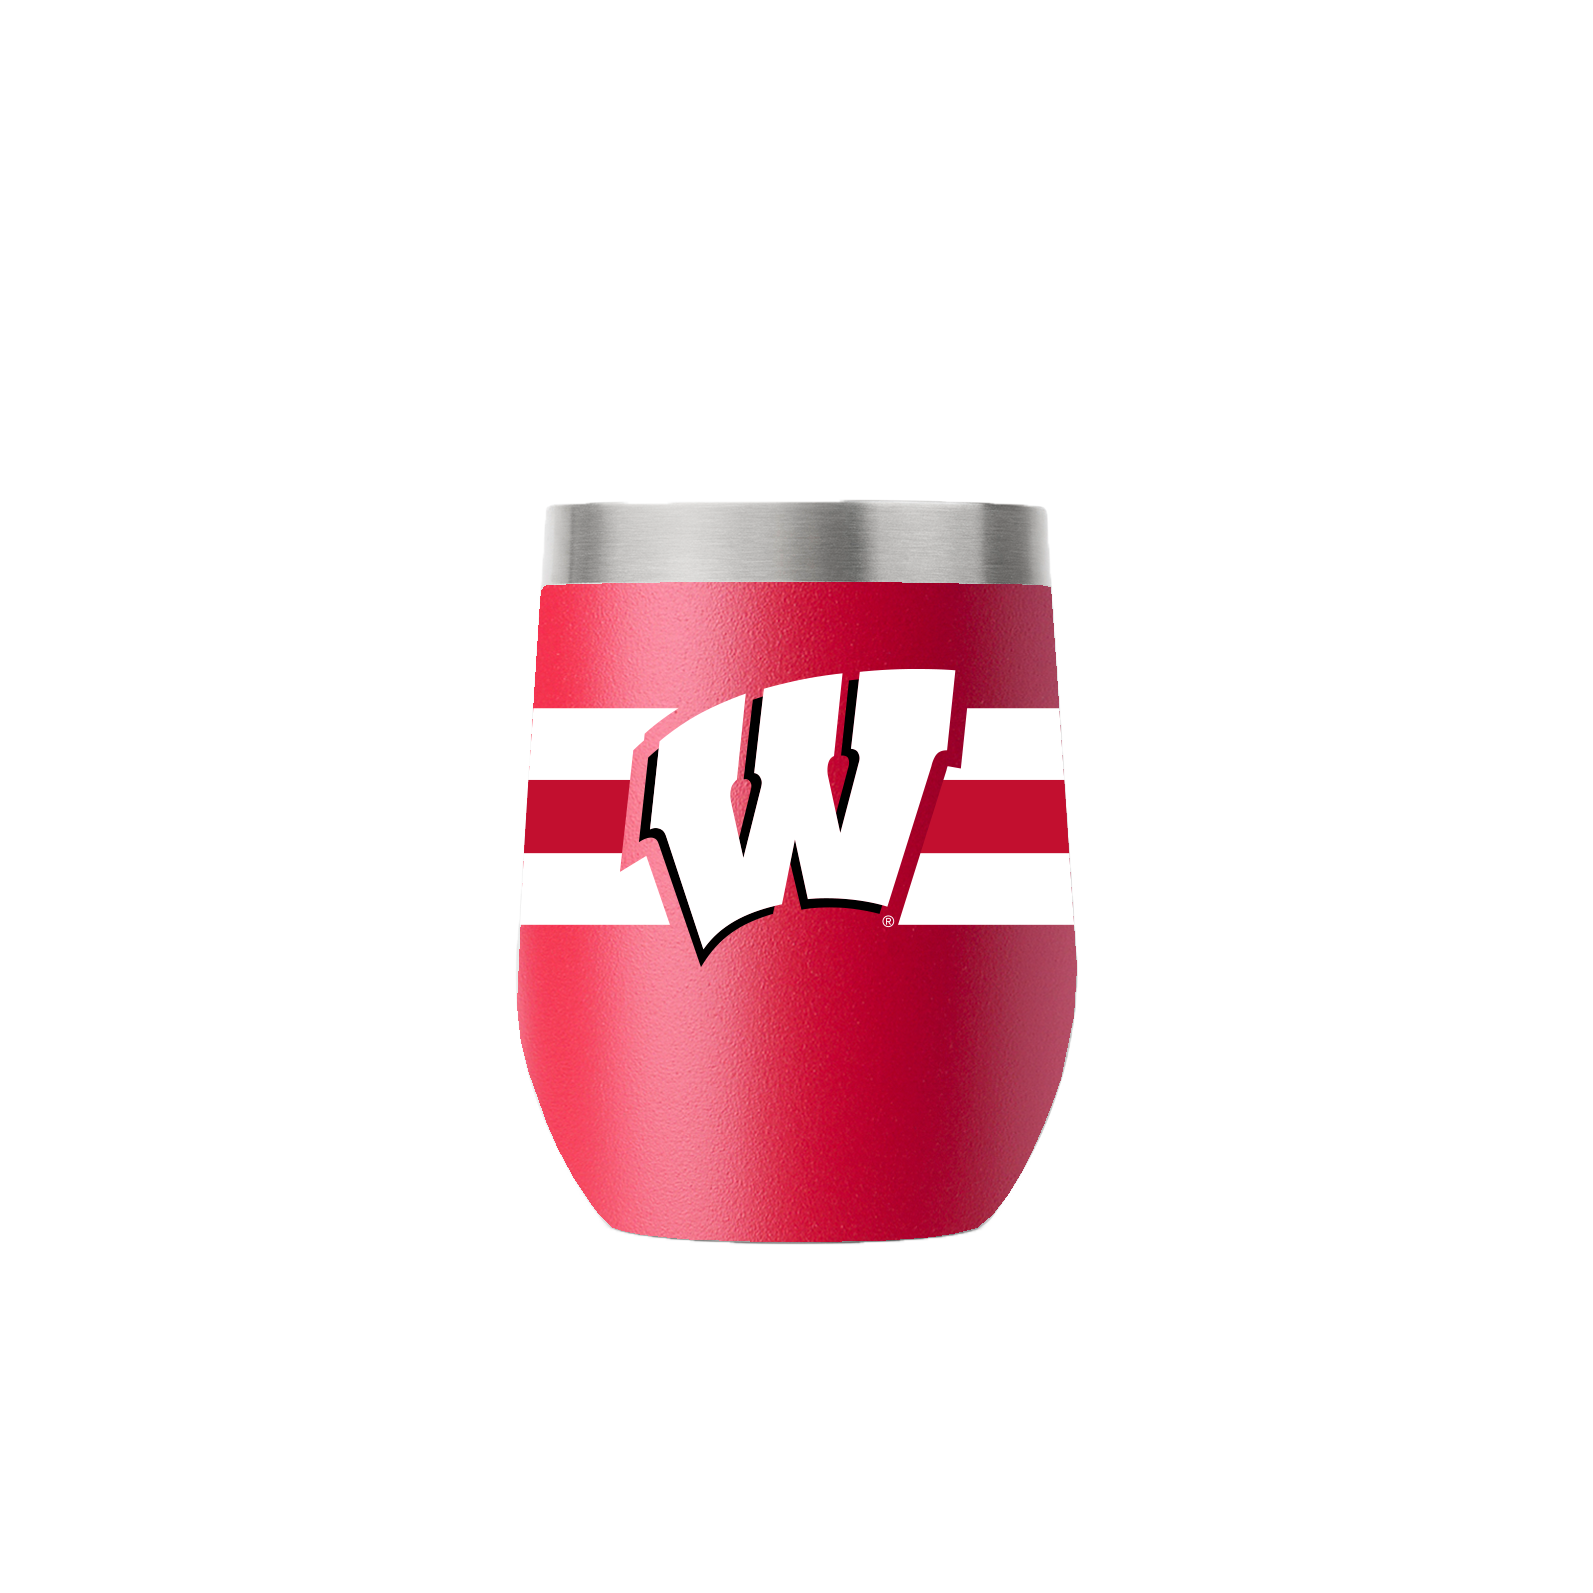 Wisconsin 12oz Stemless Red Tumbler